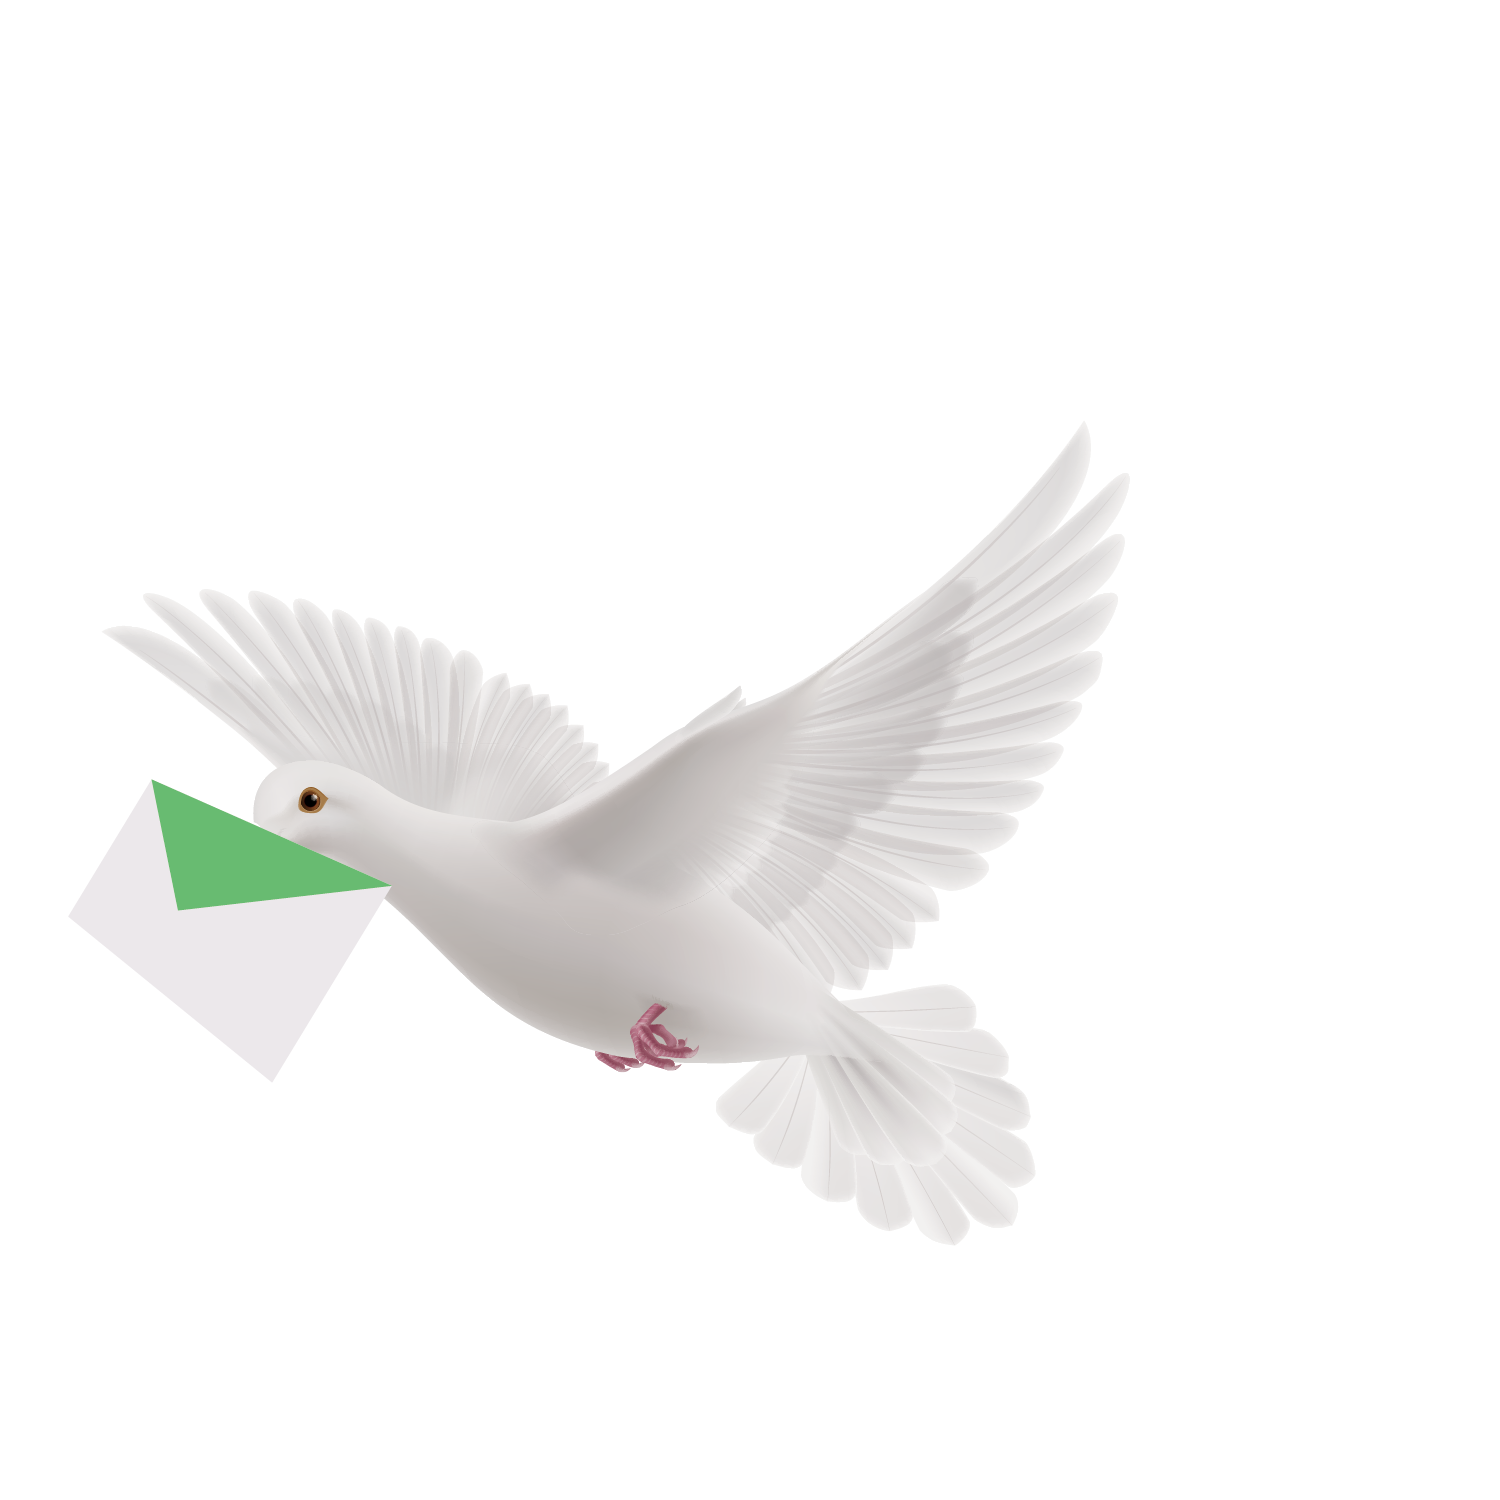 Flying Pigeon Peace HQ Image Free PNG Image